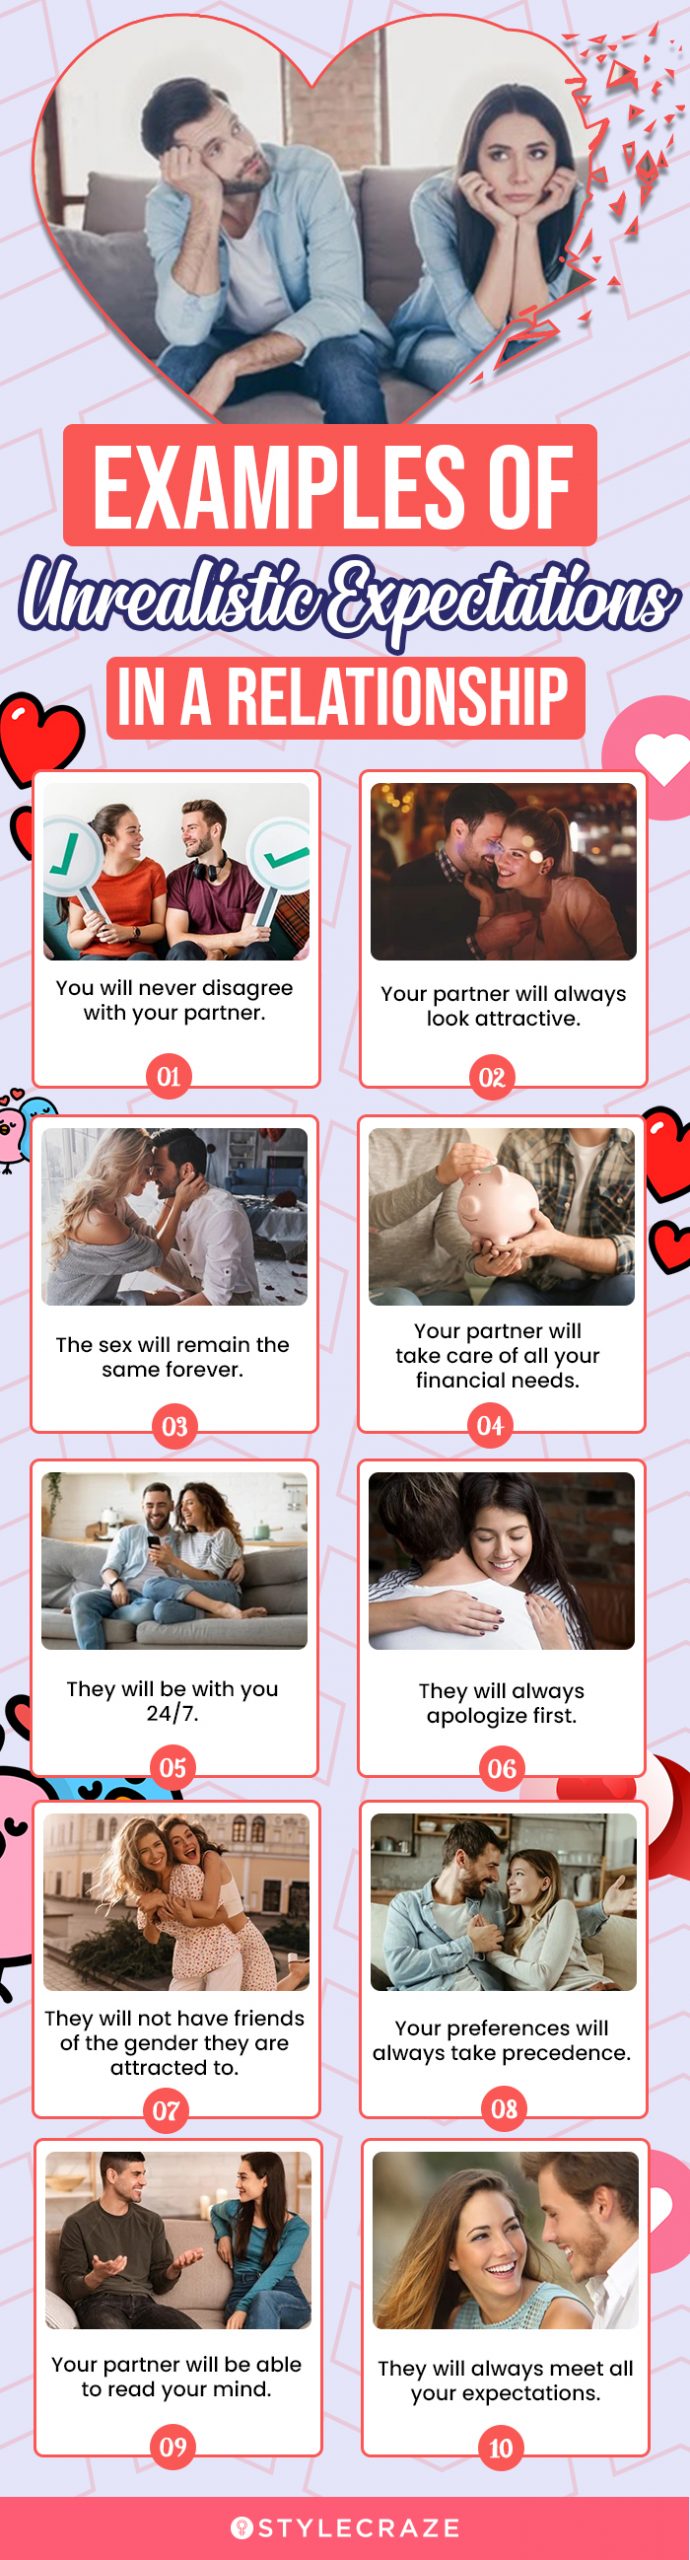 examples of unrealistic expectations in a relationship (infographic)